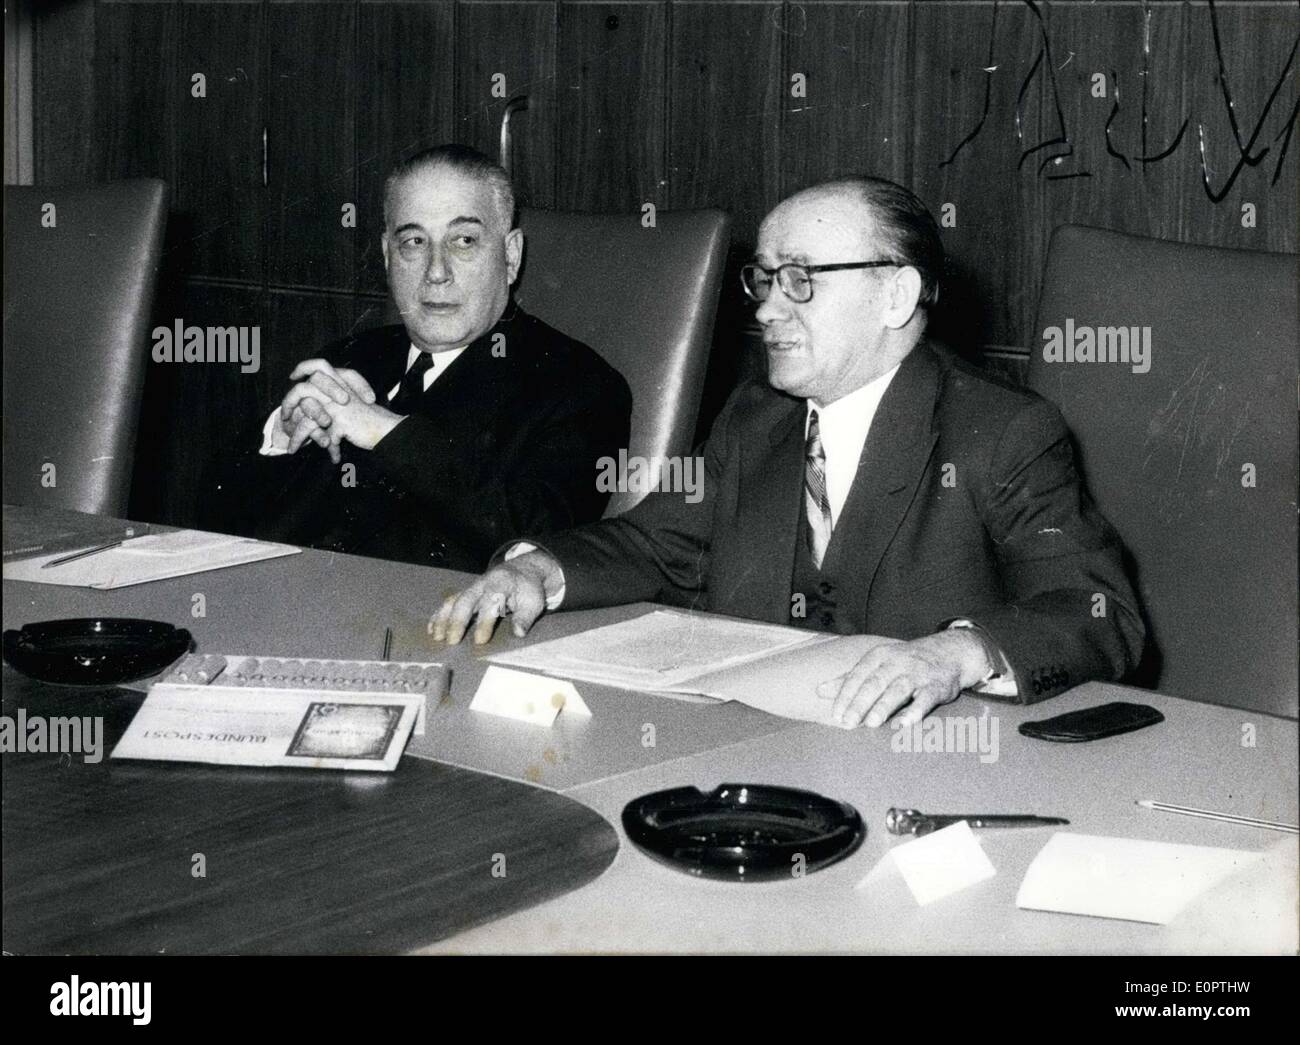 Dec. 13, 1956 - The president of the Montan-Union, Rene Mayer, arrived in D?sseldorf for a visit today along with other members Stock Photo